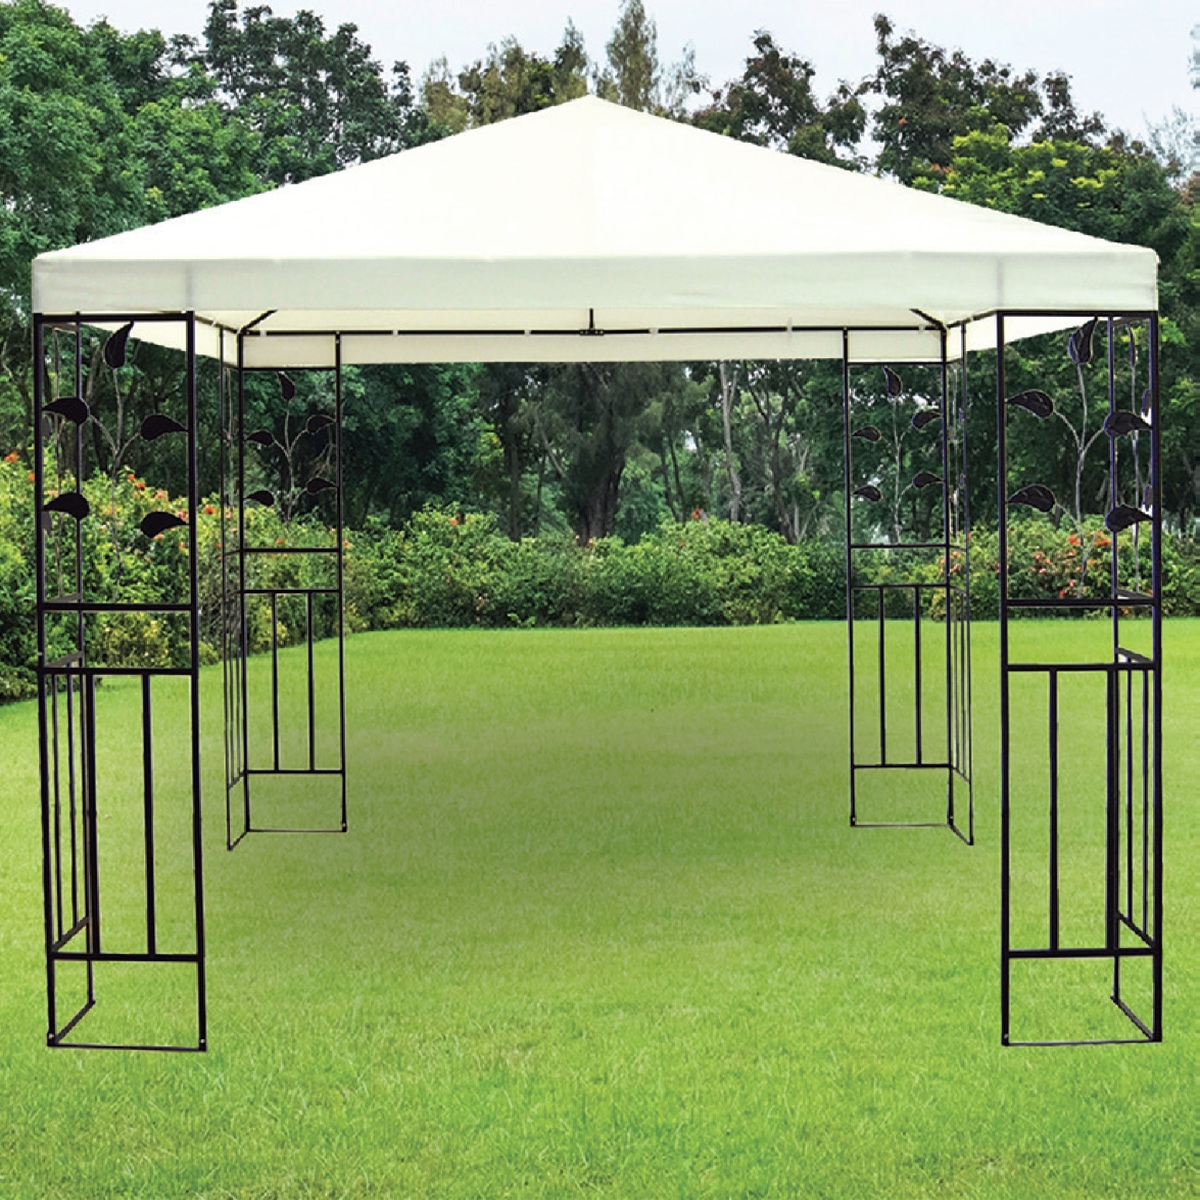 Royal Relax Gazebo 3x3mtr TP-030 Assorted Colors